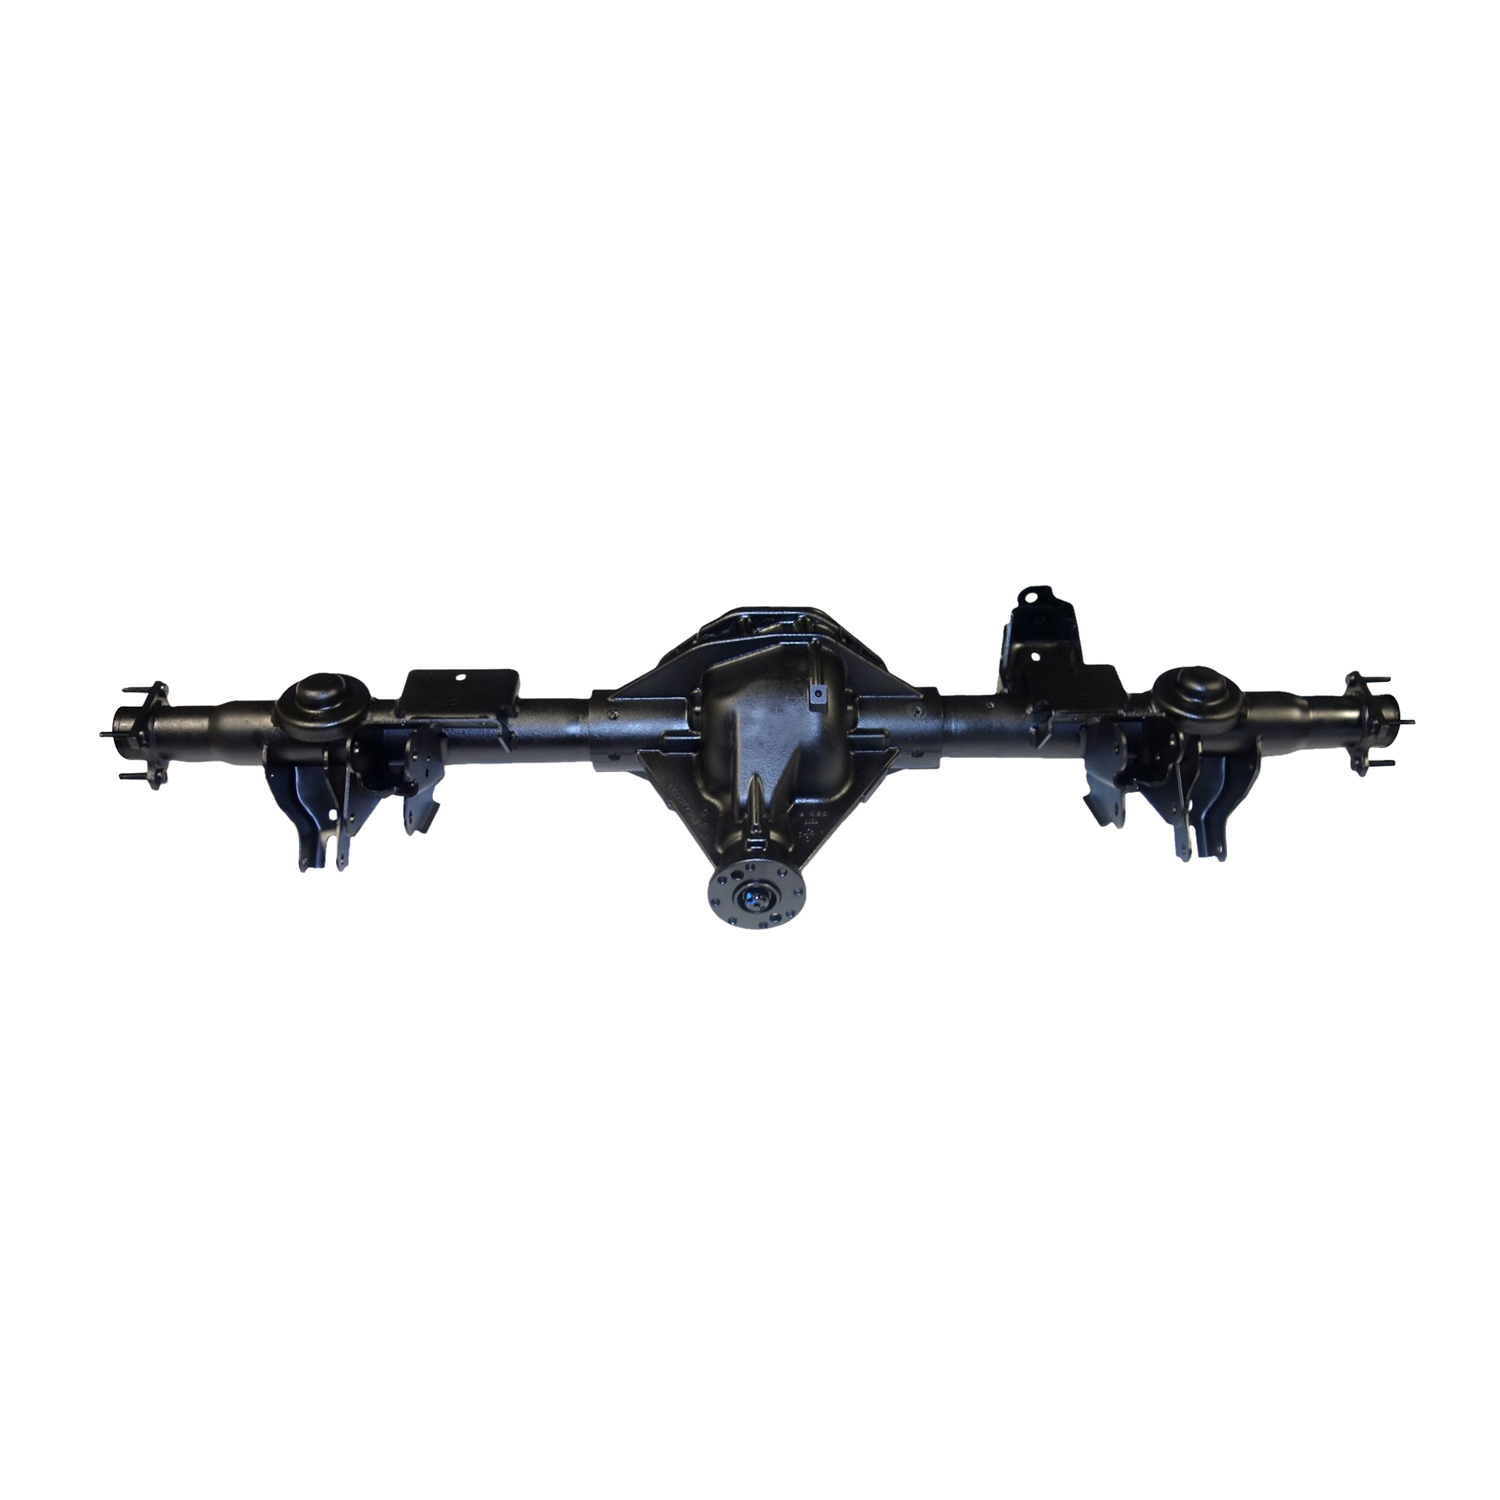 Remanufactured Complete Axle Assembly for Chrysler 9.25ZF 2013 Dodge Ram 1500 4.11 Ratio